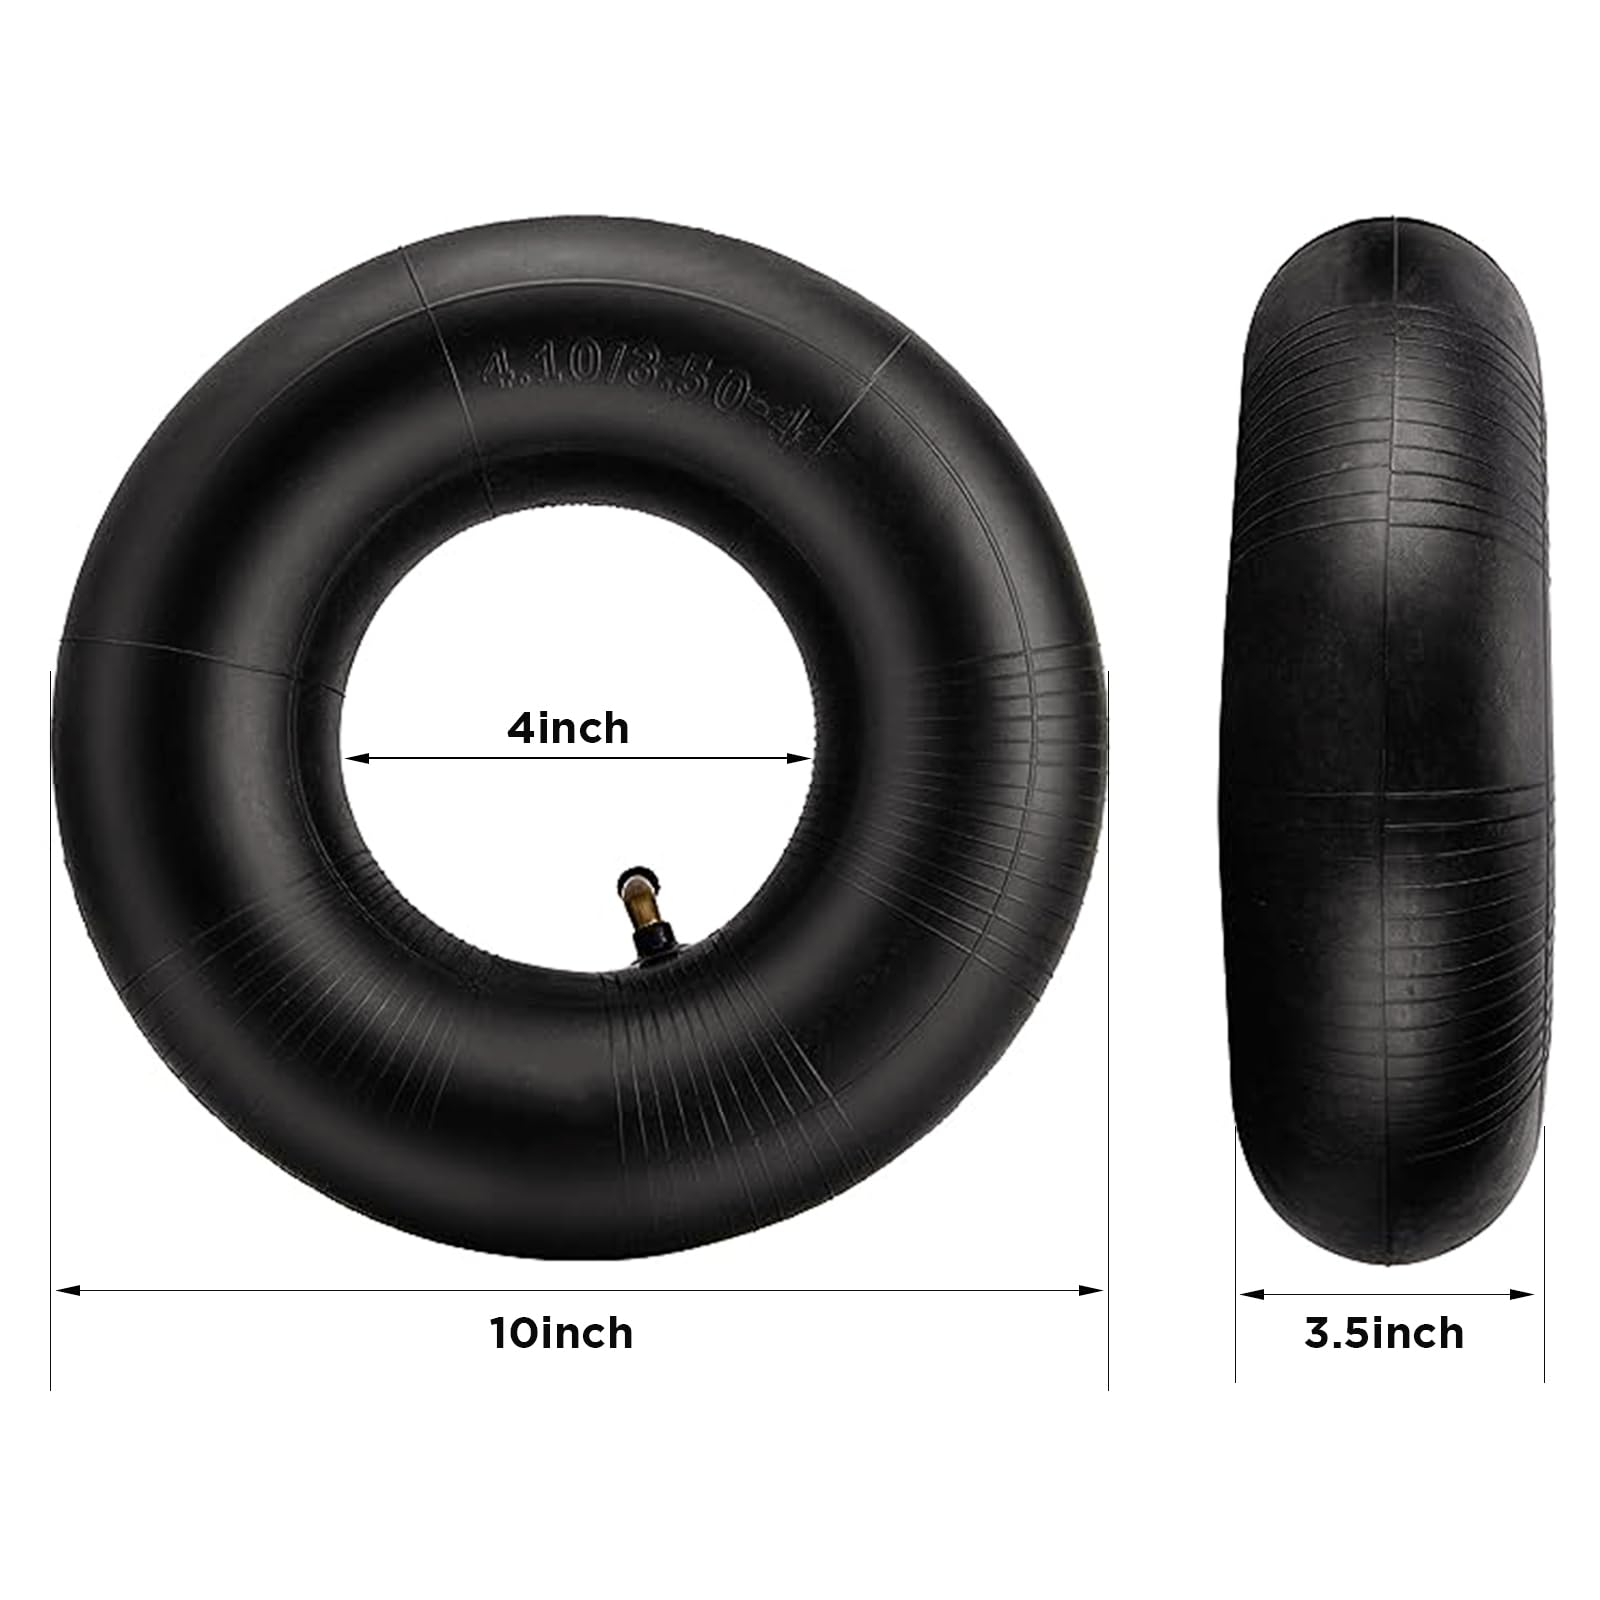 2Pcs 4.10/3.50-4" Inner Tube Tire Replacement with TR-87 Bent Valve Stem, Replacement Lawn Mower Tire Tubes,Wheelbarrow Tires,for Hand Truck tires,Tractor, Garden Carts, Mowers,Wagon,and More